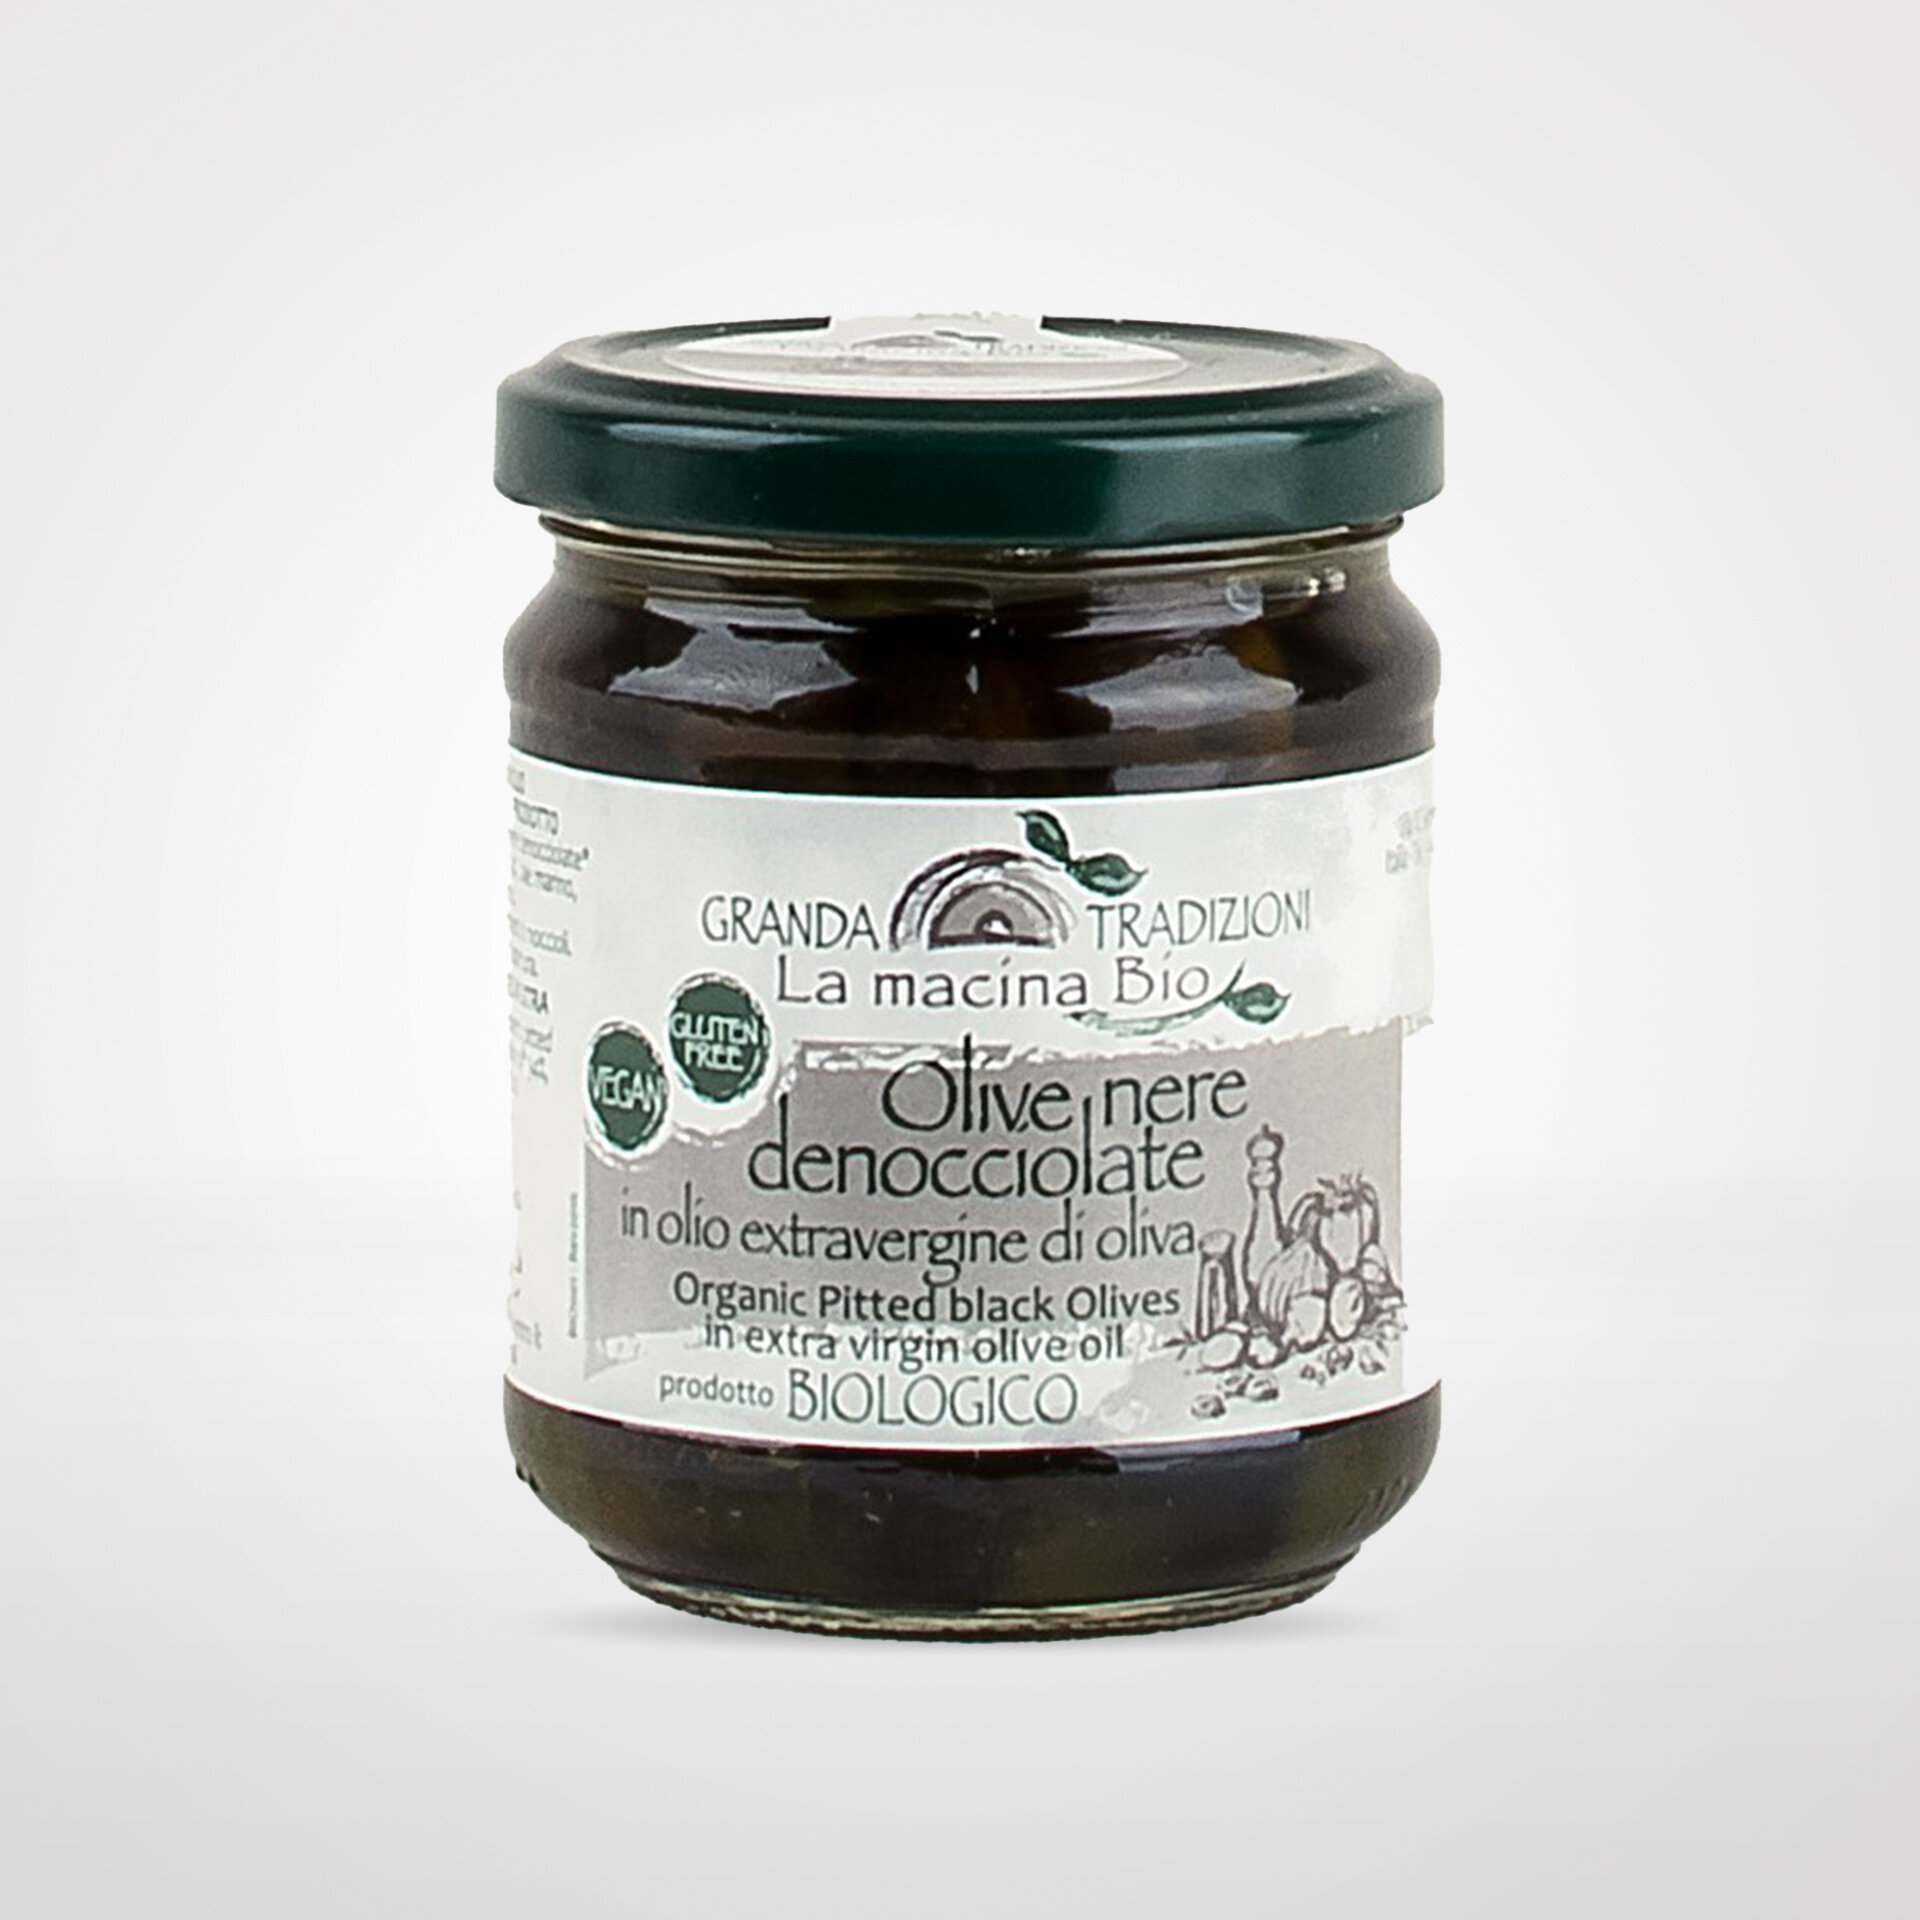 Organic Pitted Black Olives in Extra Virgin Olive Oil